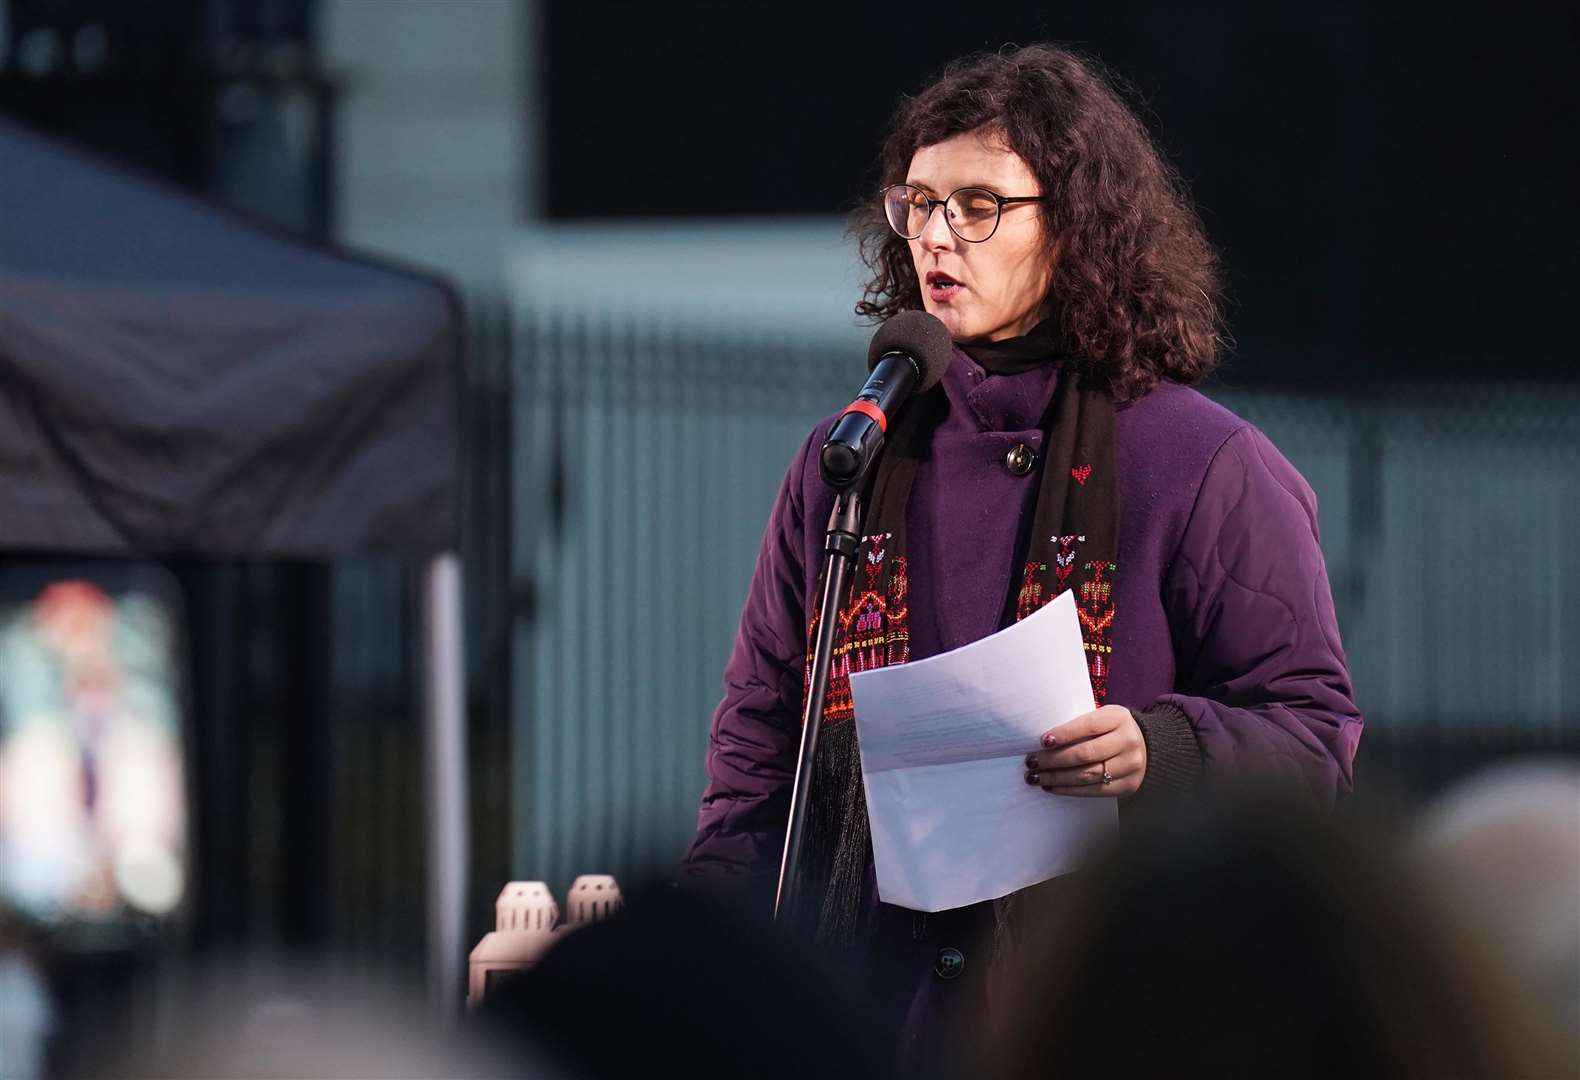 MP Layla Moran says her relatives are among those sheltering in the church (James Manning/PA)